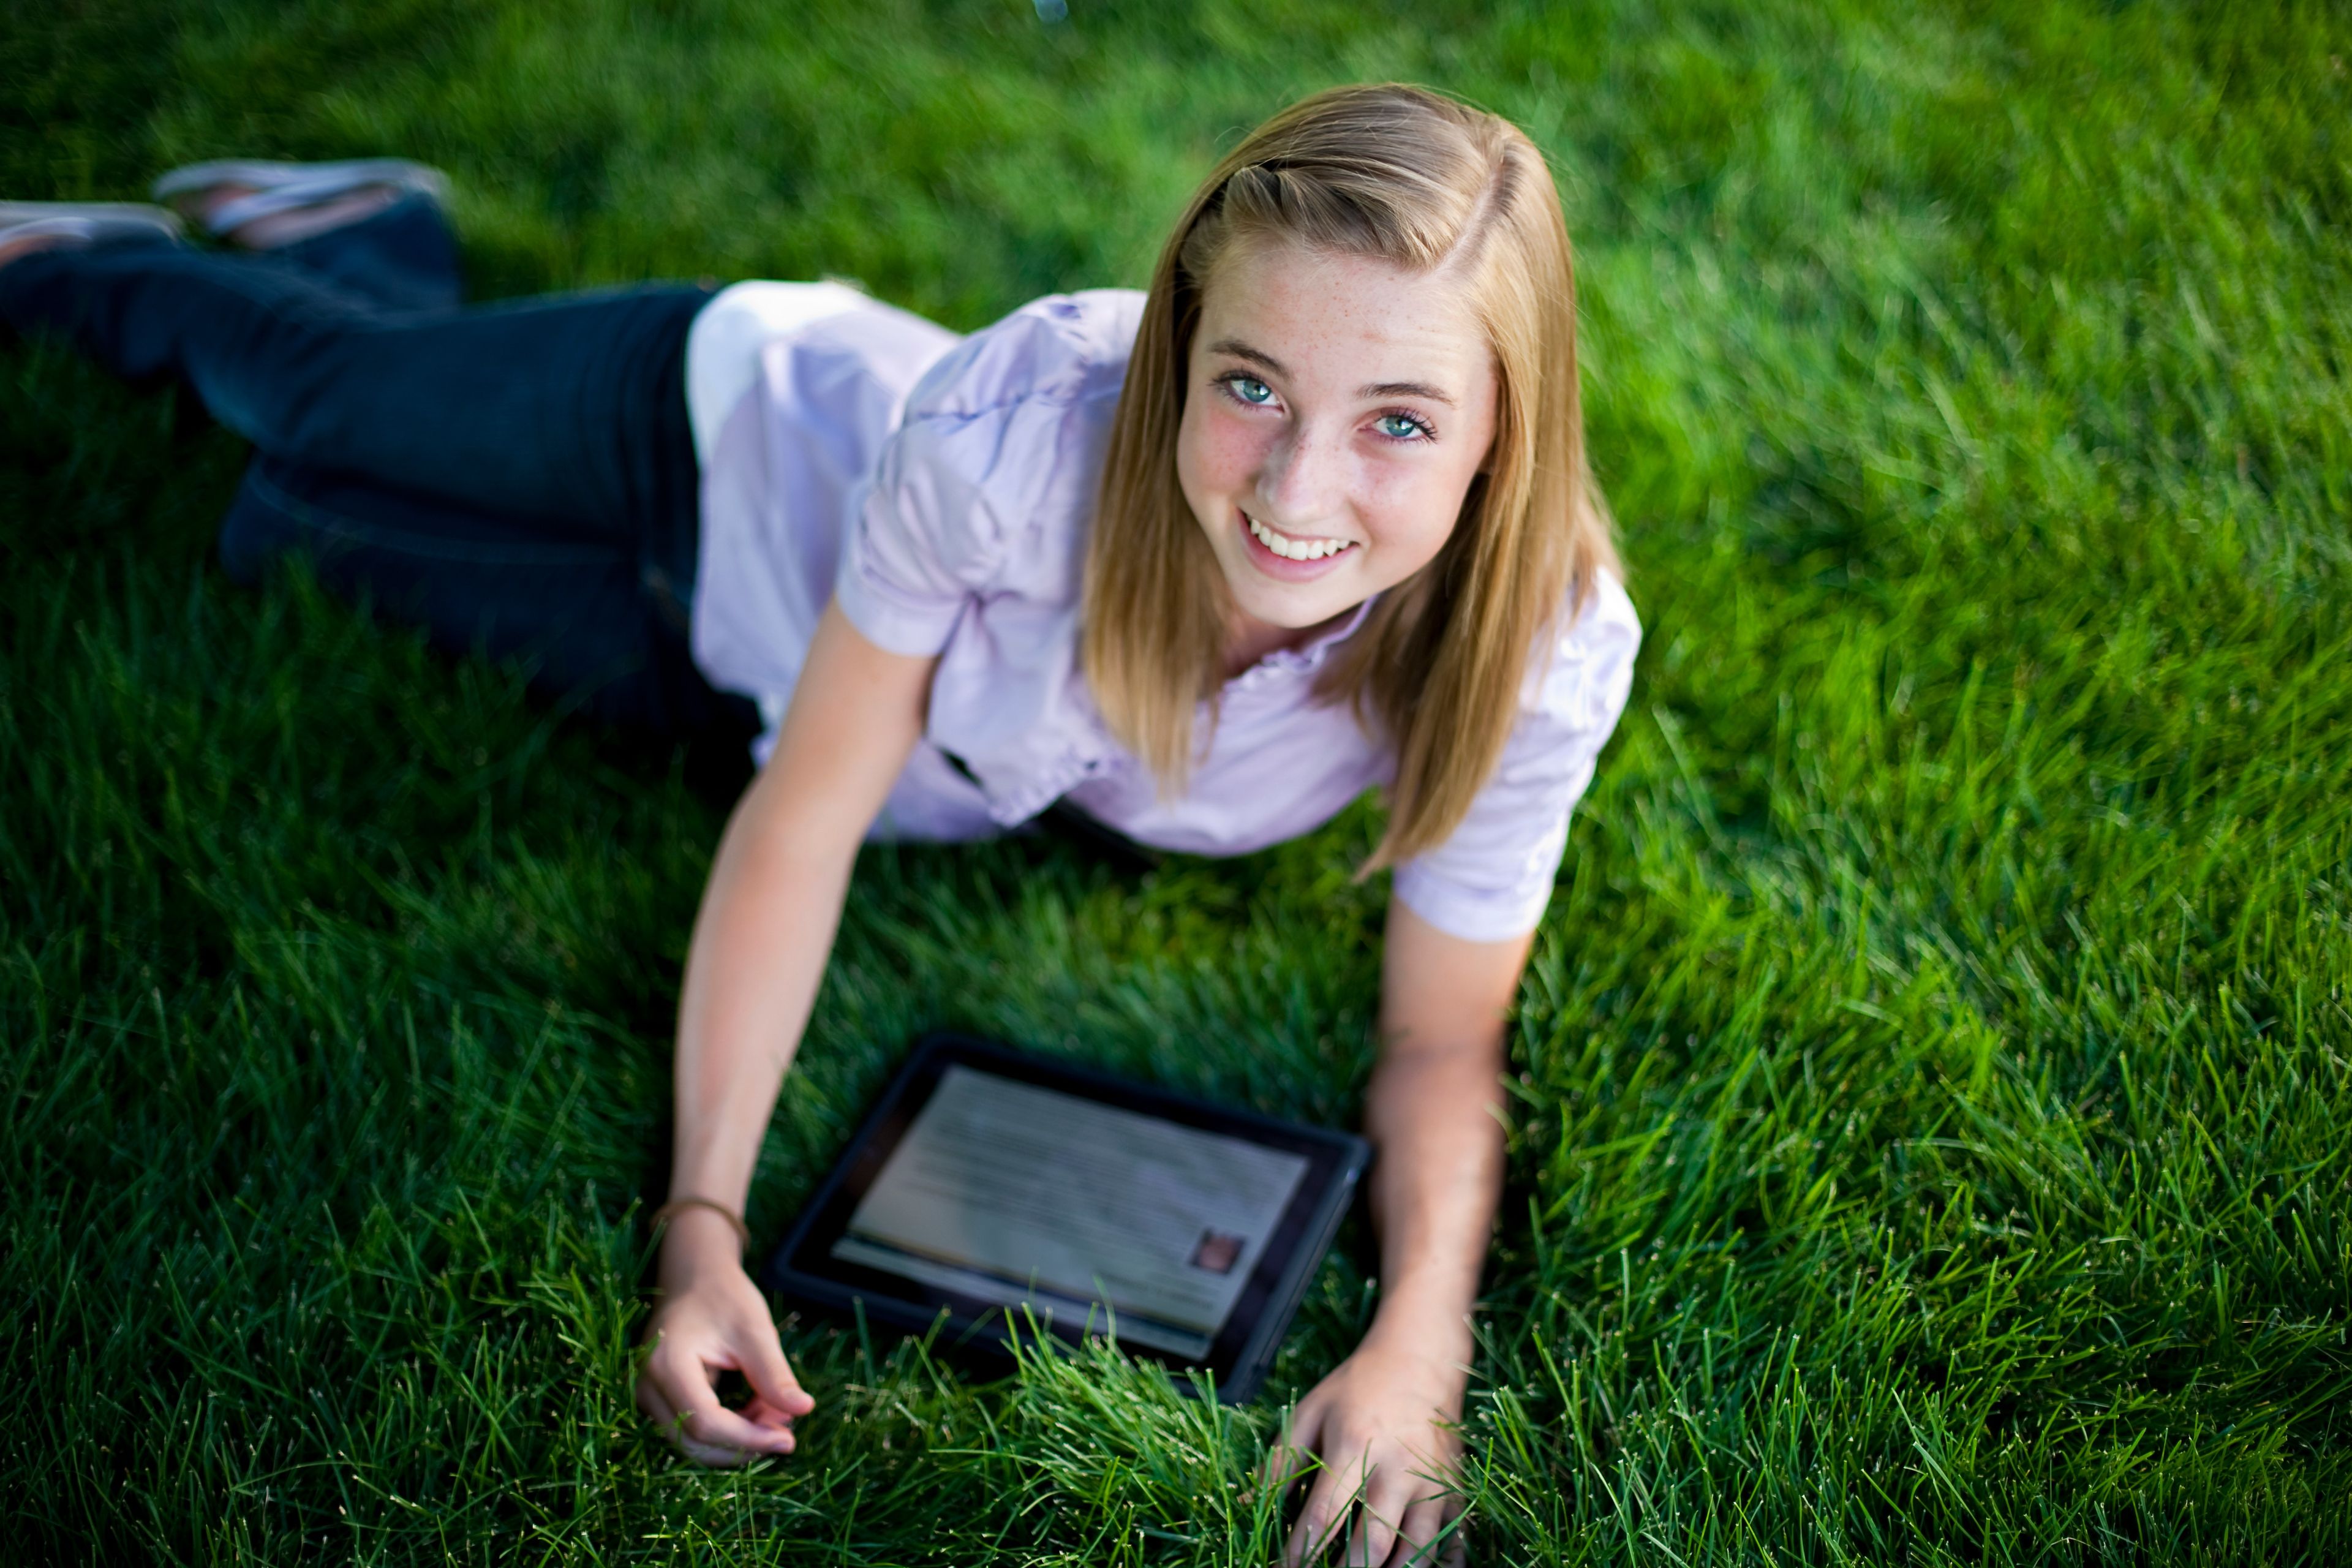 A young woman on the grass outside, using a tablet.